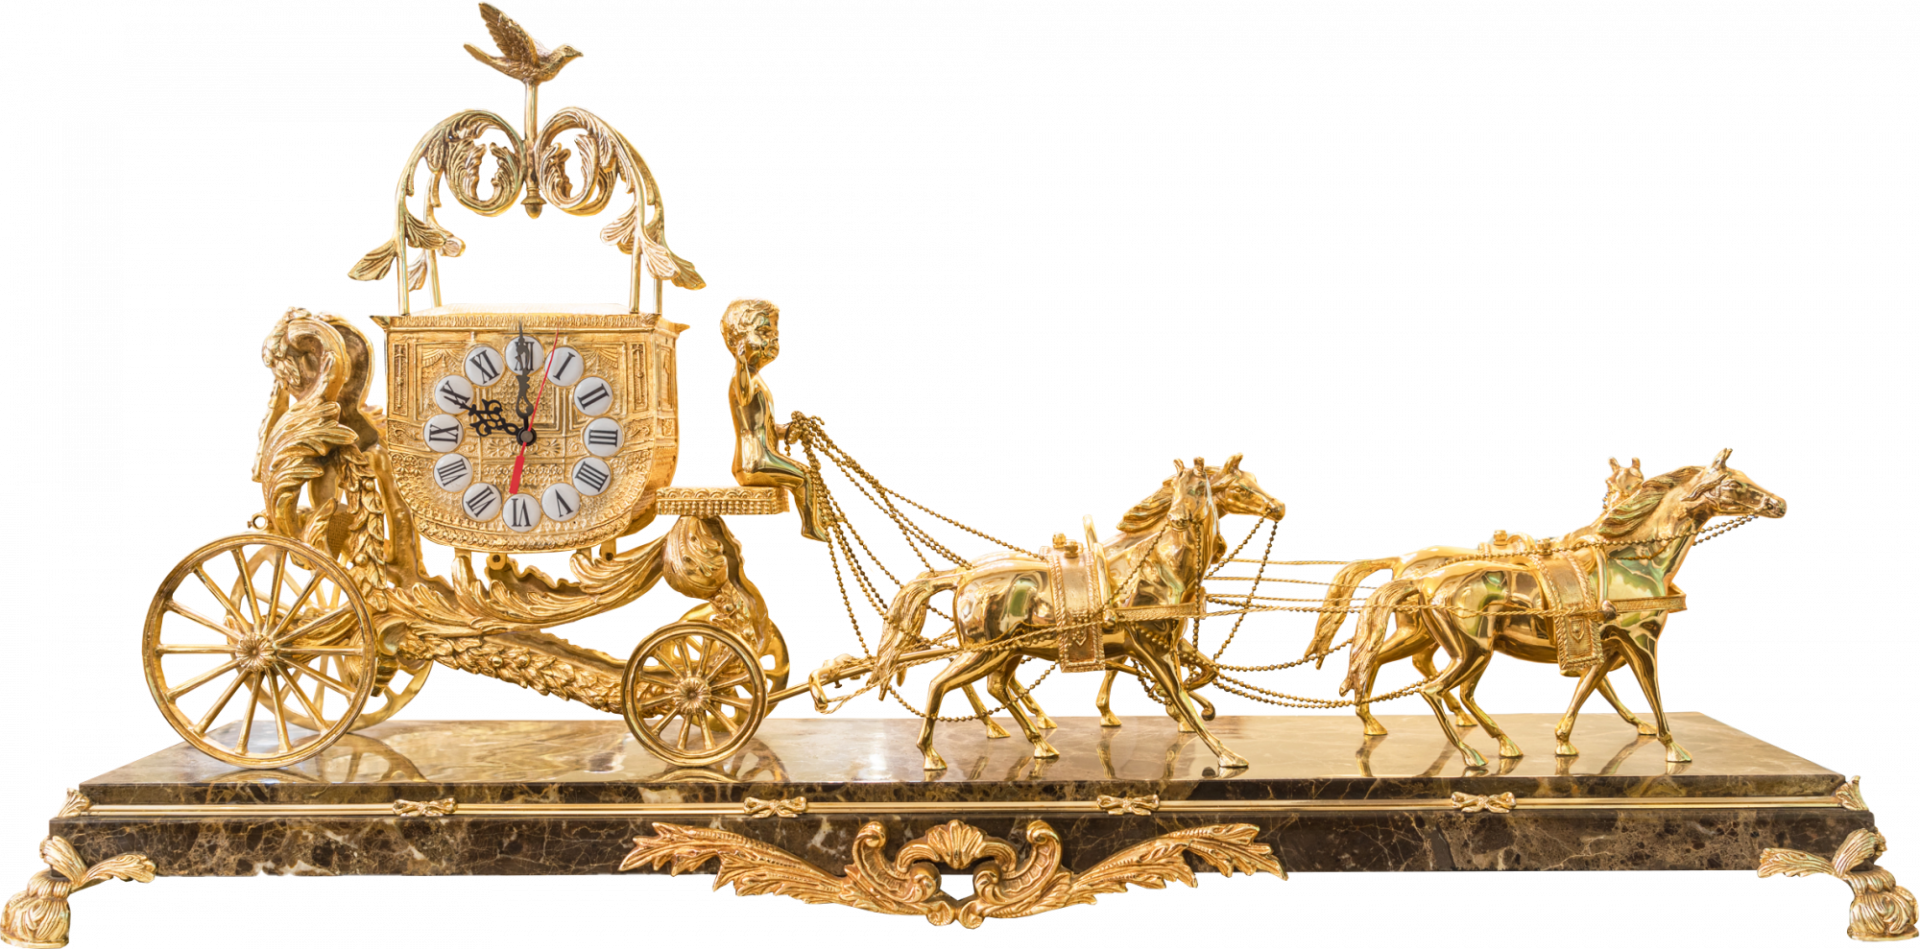 Luxury Four Horse-drawn Carriage Table Clock in Dark Emperador Marble Stand